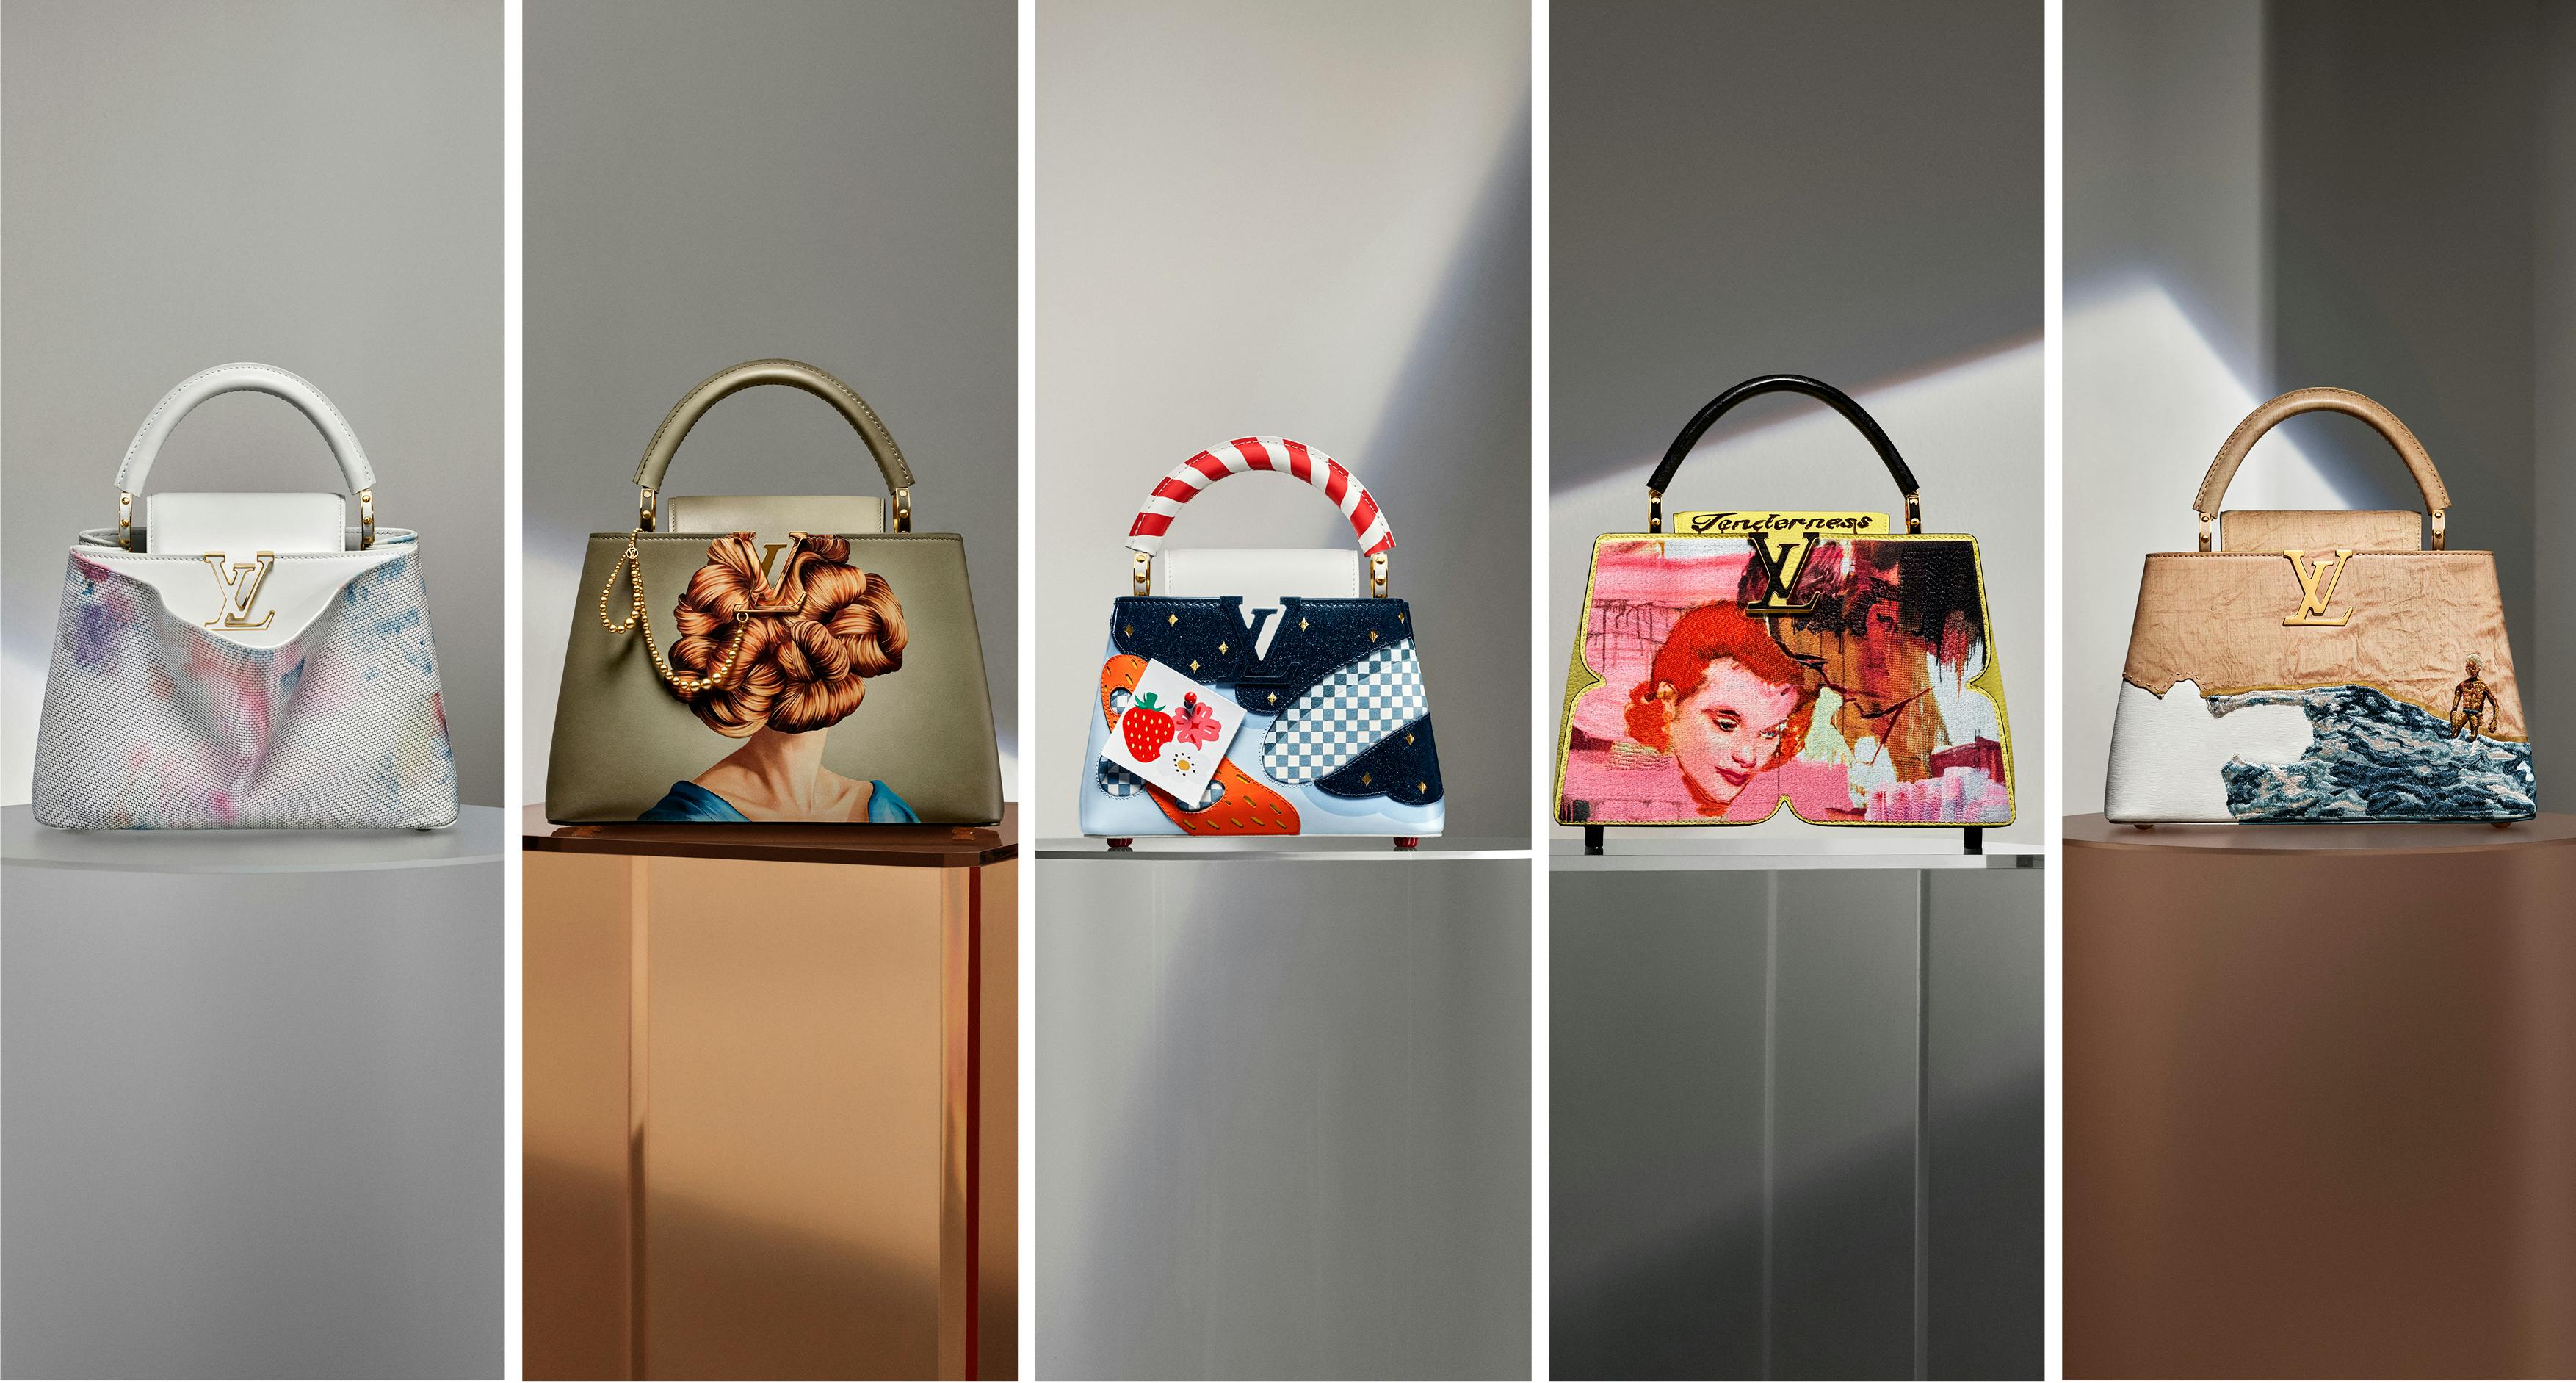 Artycapucines 2023: Louis Vuitton Capucines Through the Eyes of 5 New Artists